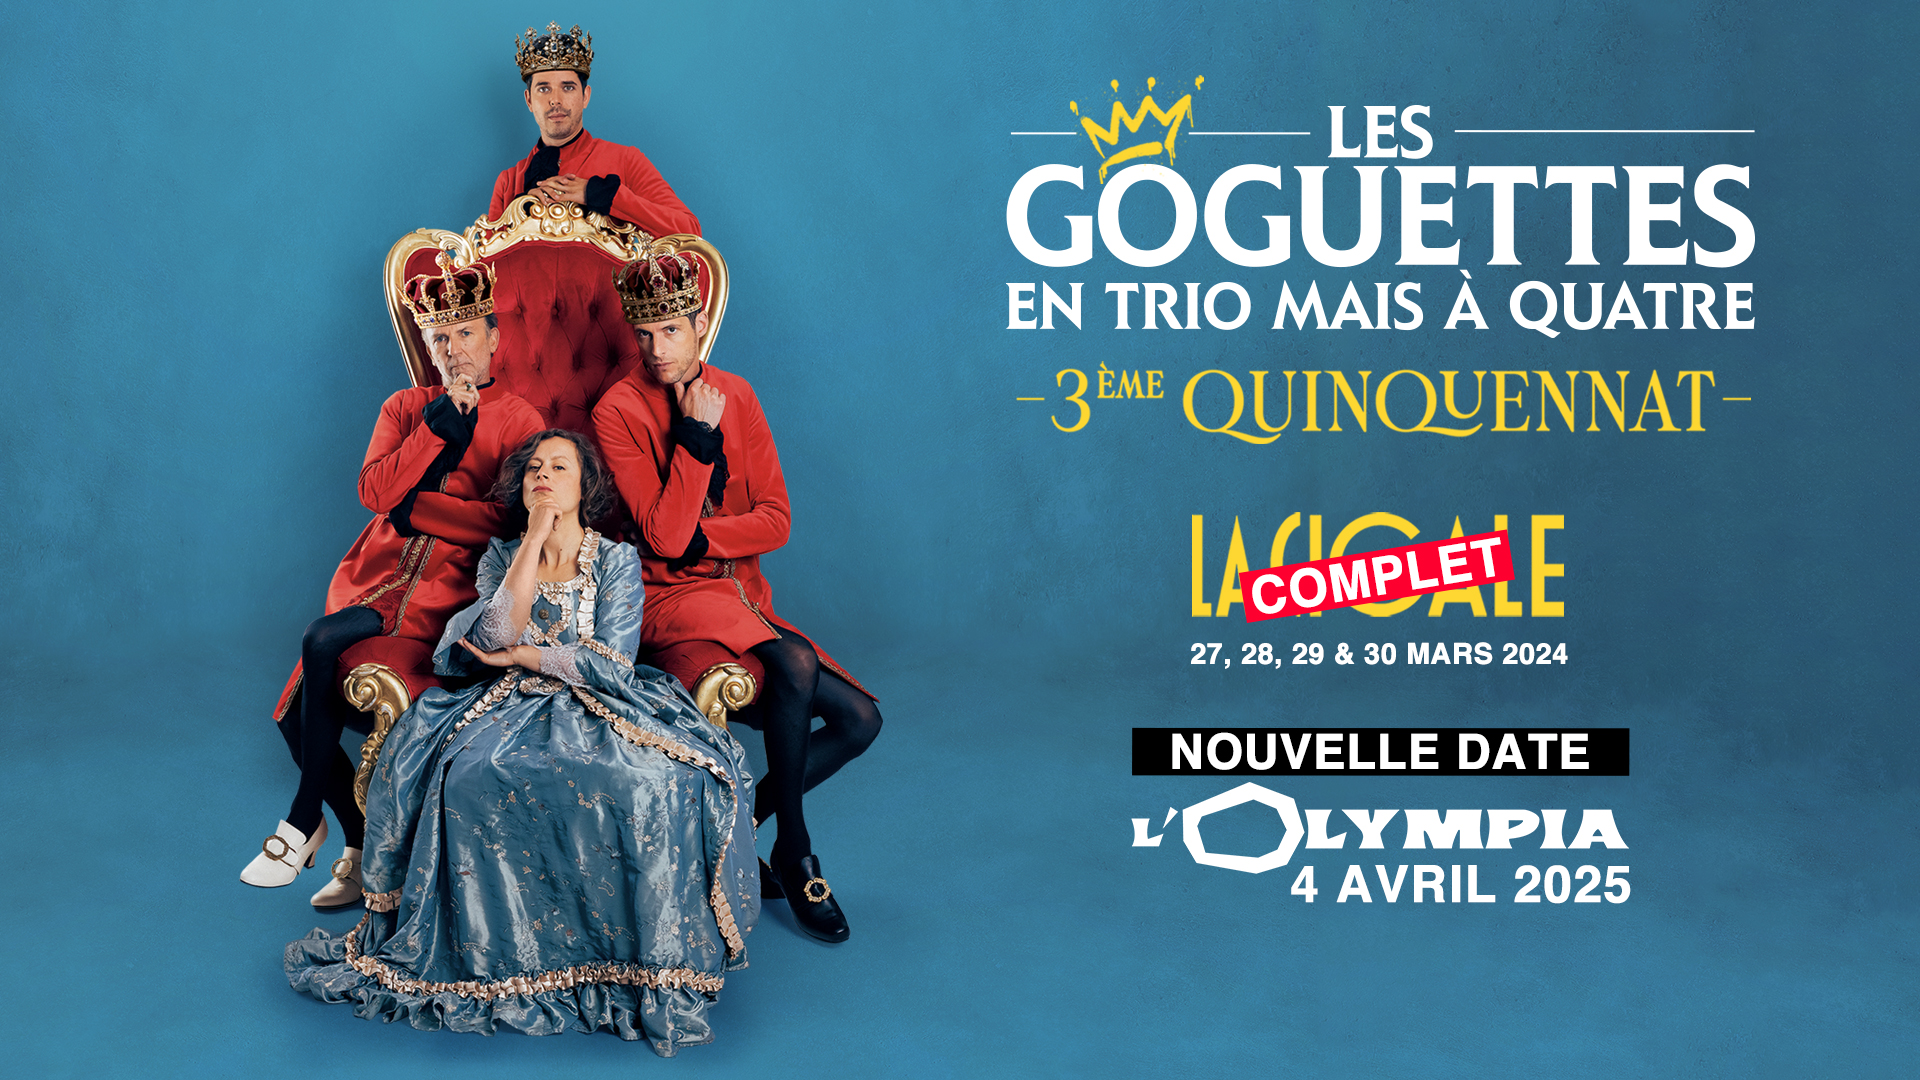 Les Goguettes at Olympia Tickets